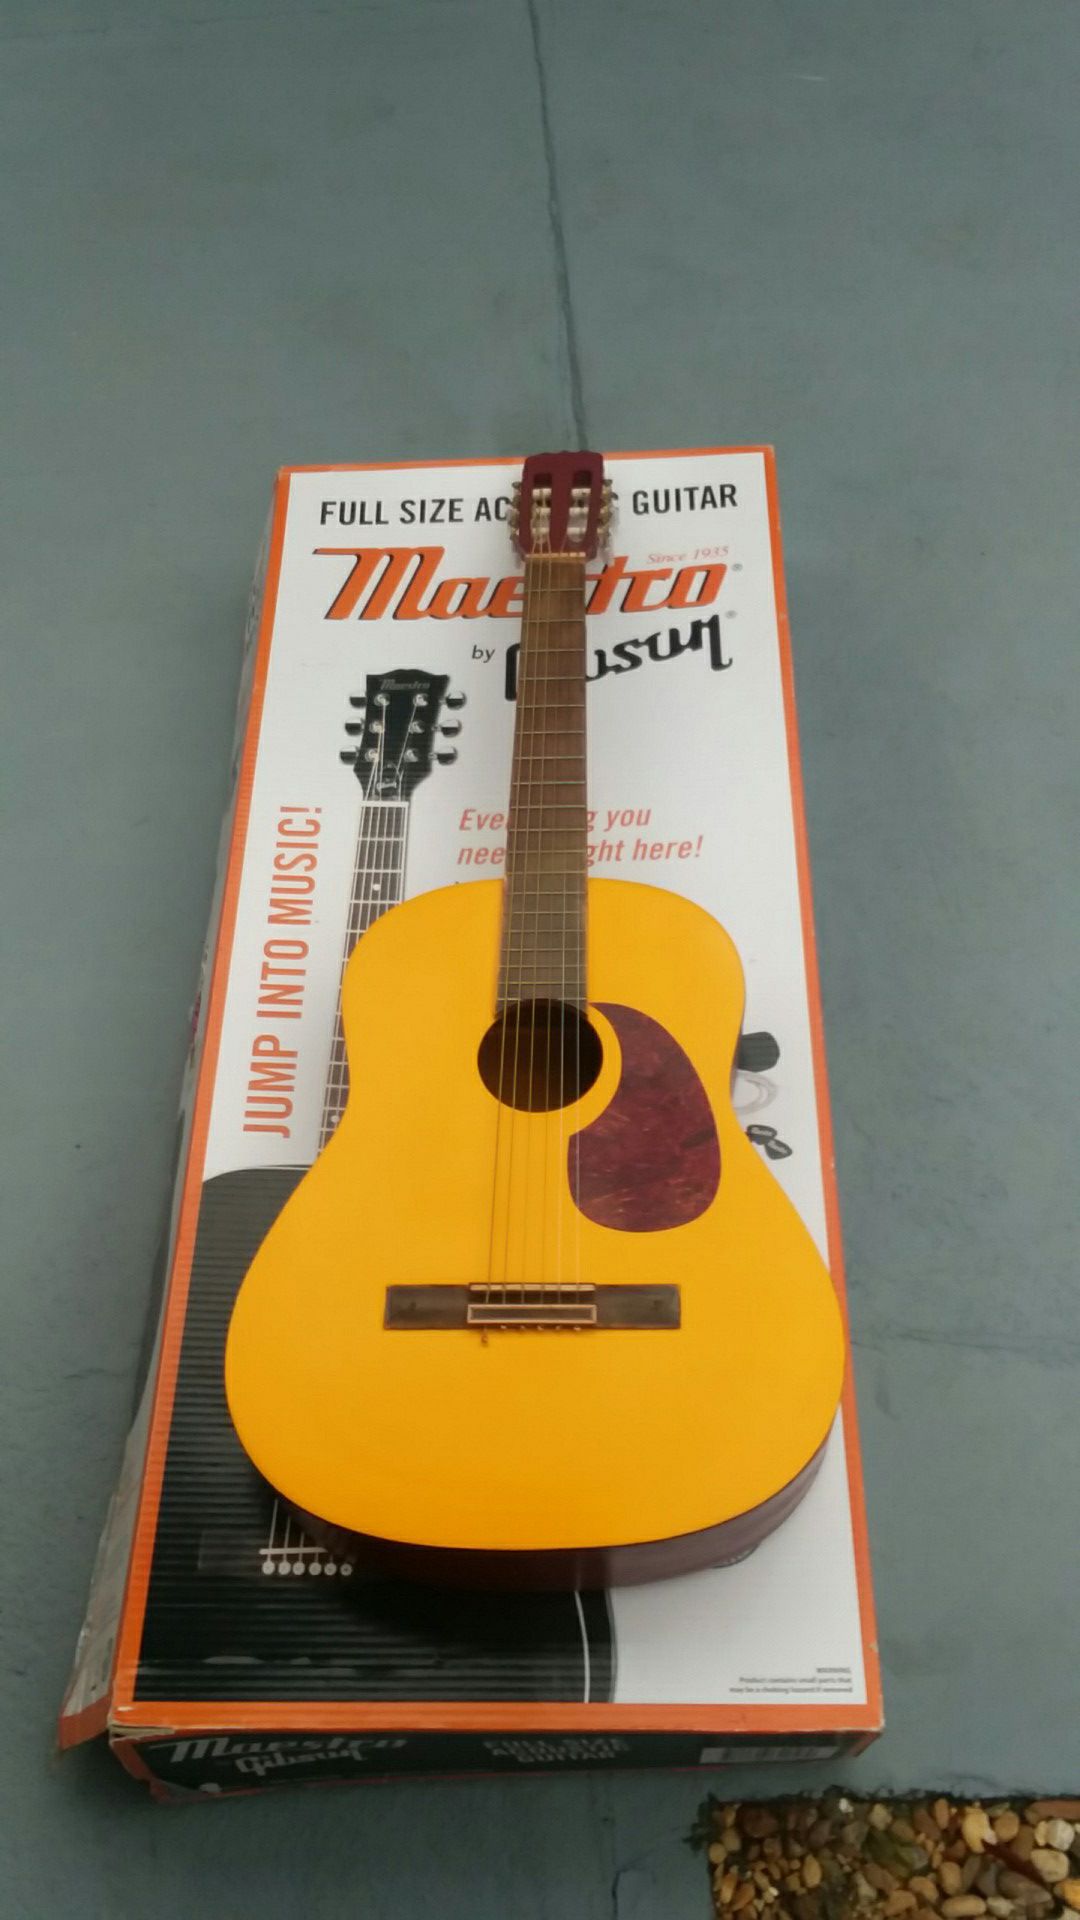 Acoustic Guitar. "Refurbished". Great sound, easy to play frets.